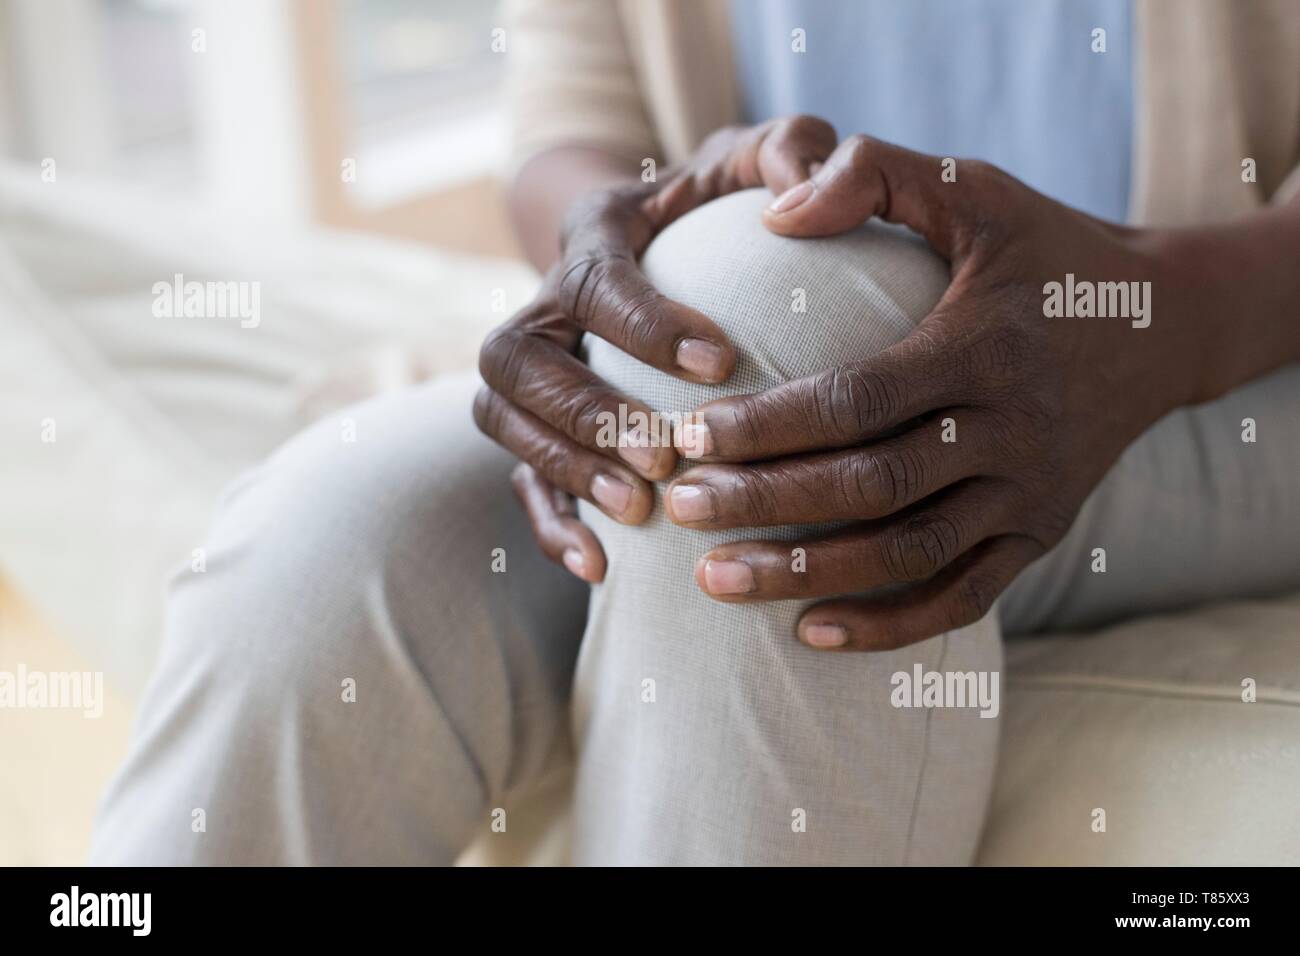 Woman with knee pain Stock Photo